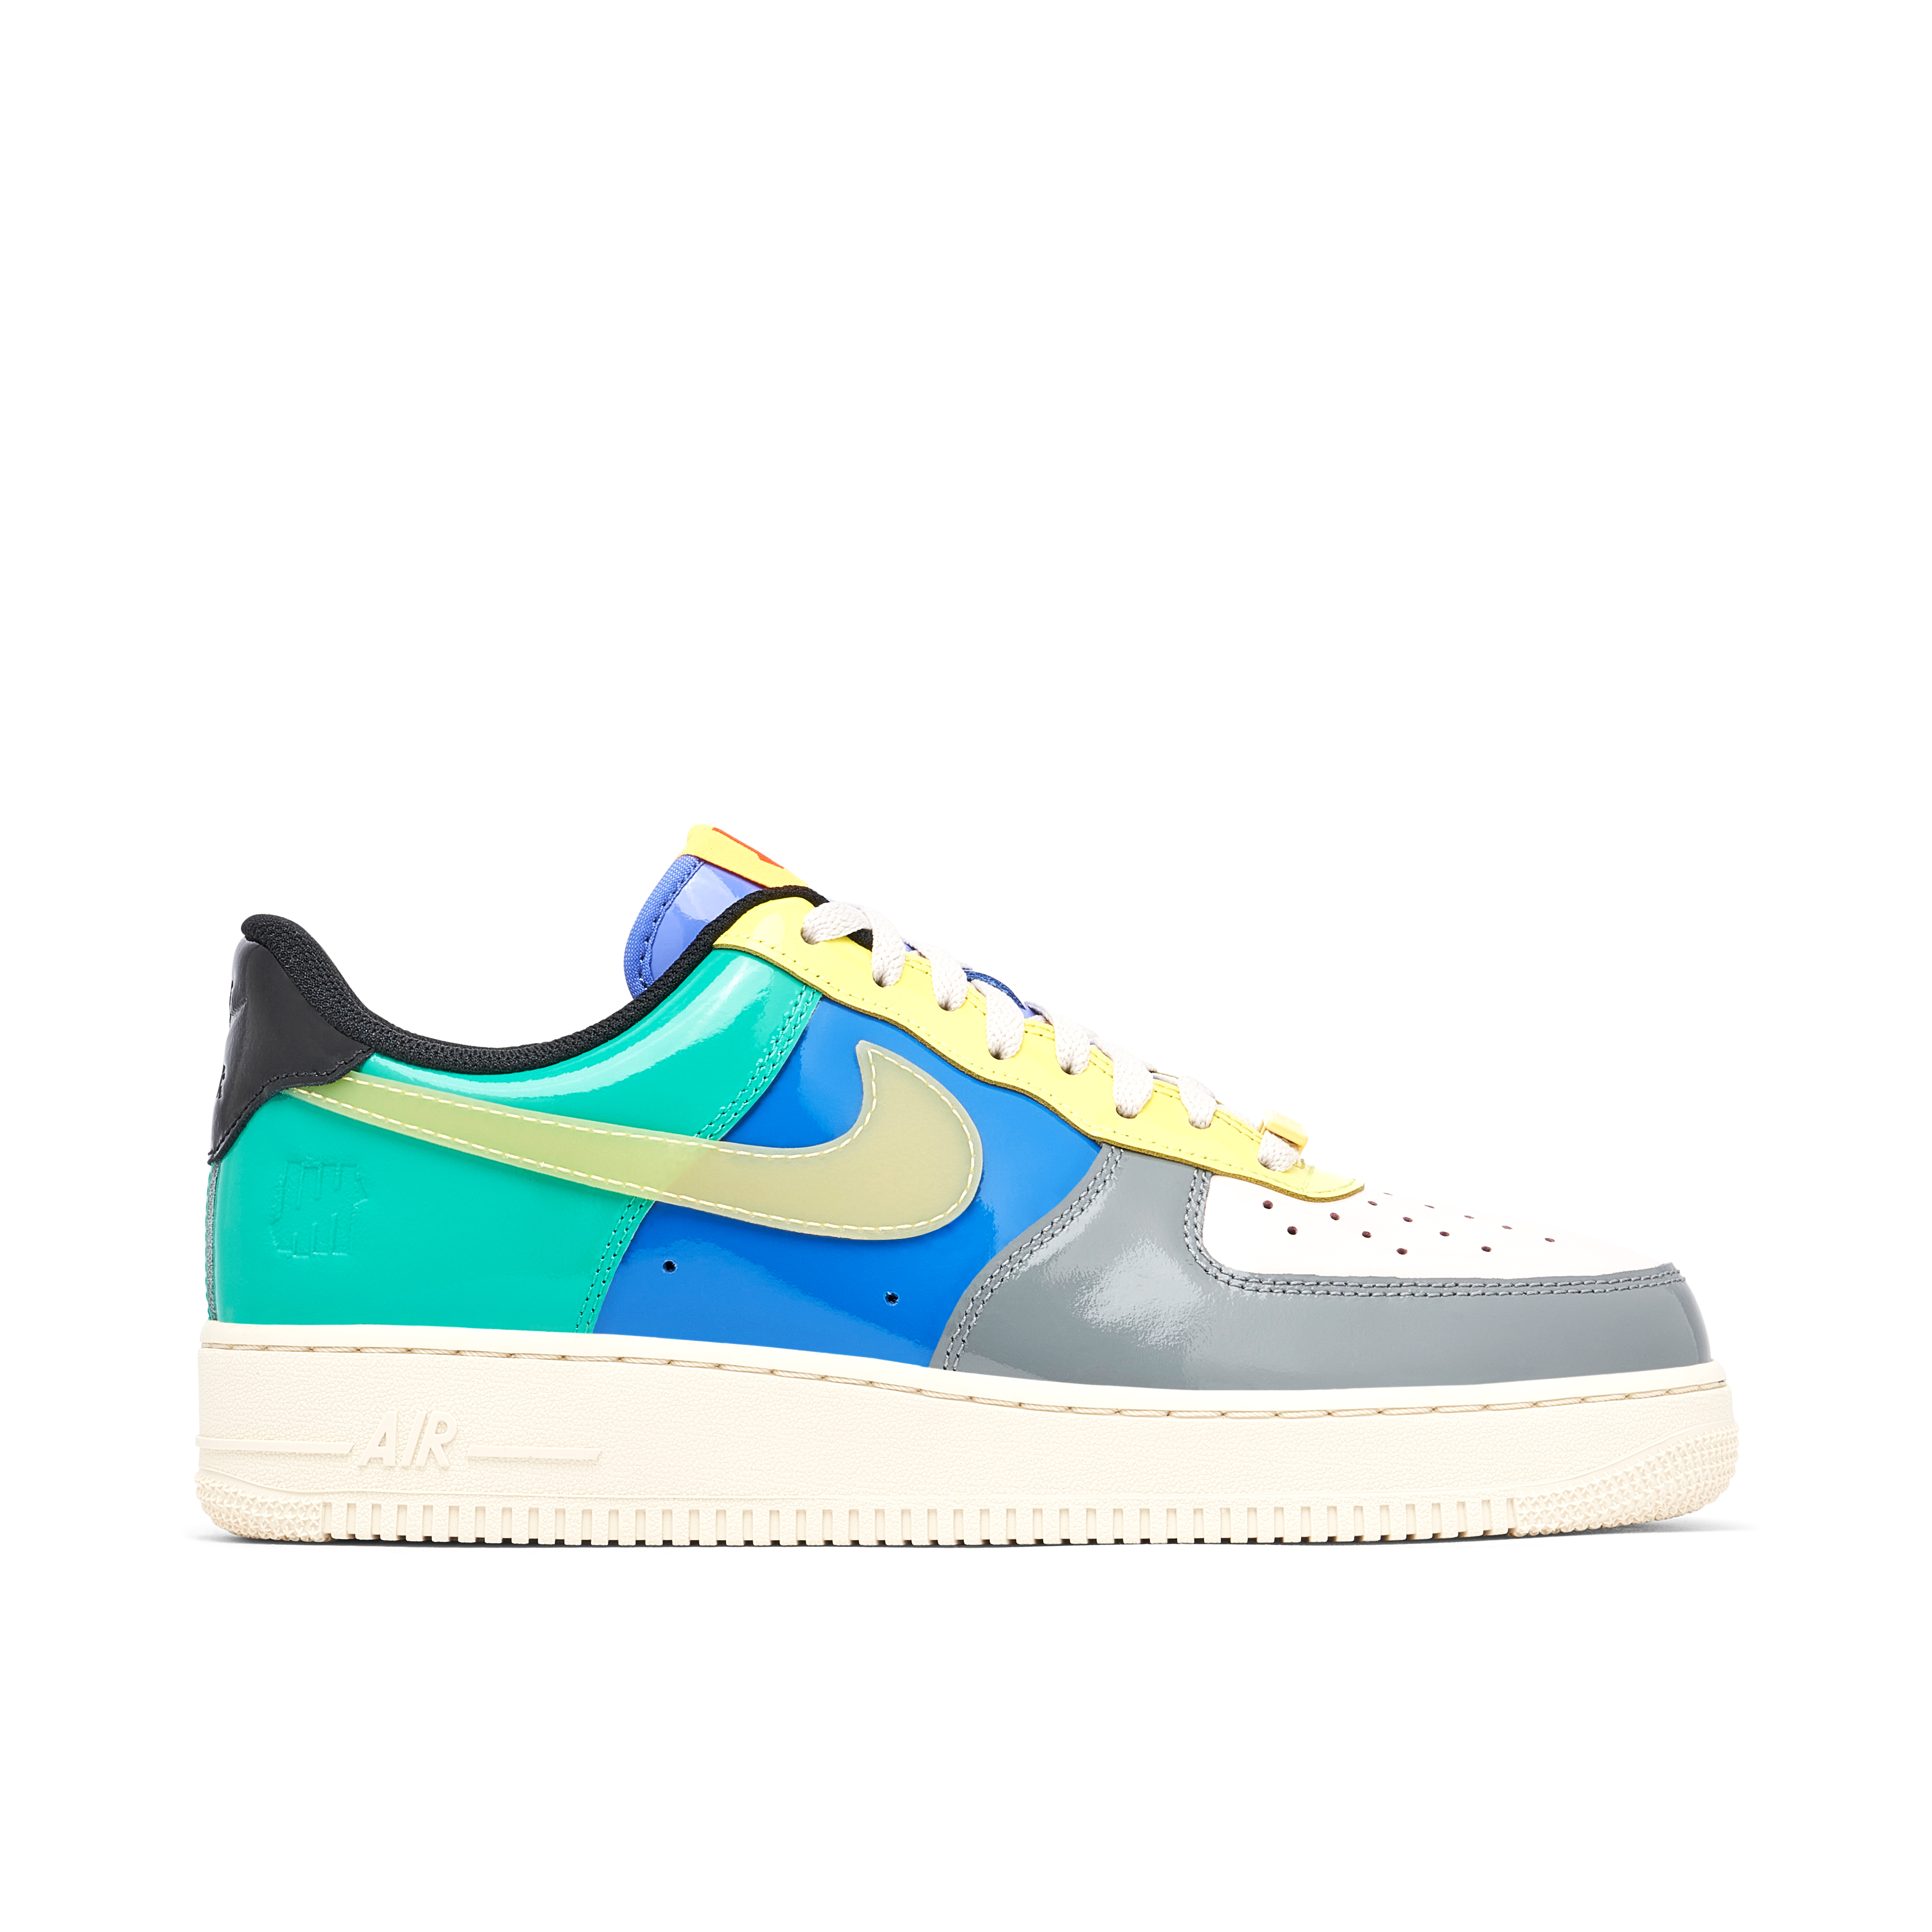 Undefeated Nike Air Force 1 Low Multi-Patent DV5255-400